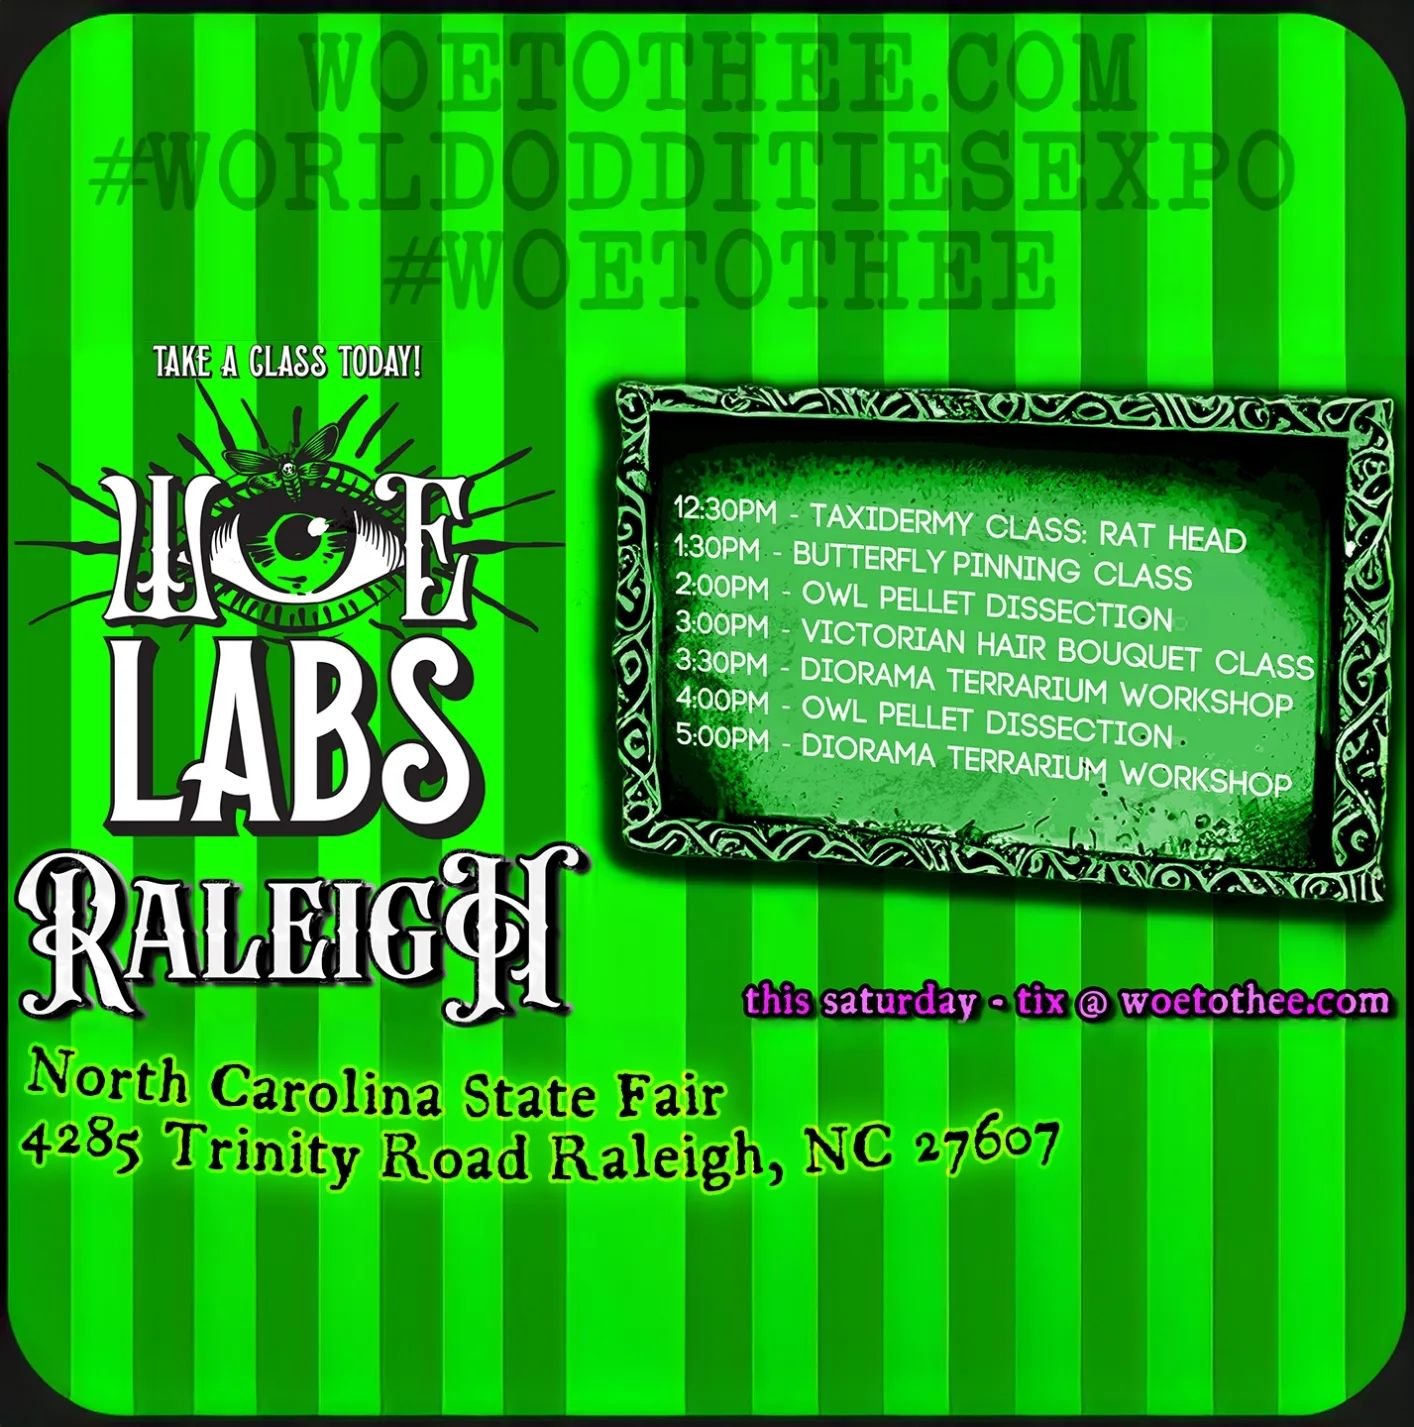 💀 WOE Raleigh Labs Schedule! Each class has tickets available to purchase on our website! 🐭

🎃 WOE ARRIVES IN RALEIGH, NC 🎪
❌
🎃 Saturday, May 11th 🎉 12pm - 8pm 
👁️ North Carolina State Fair Exposition Center 
🙀 4285 Trinity Road, Raleigh NC 2